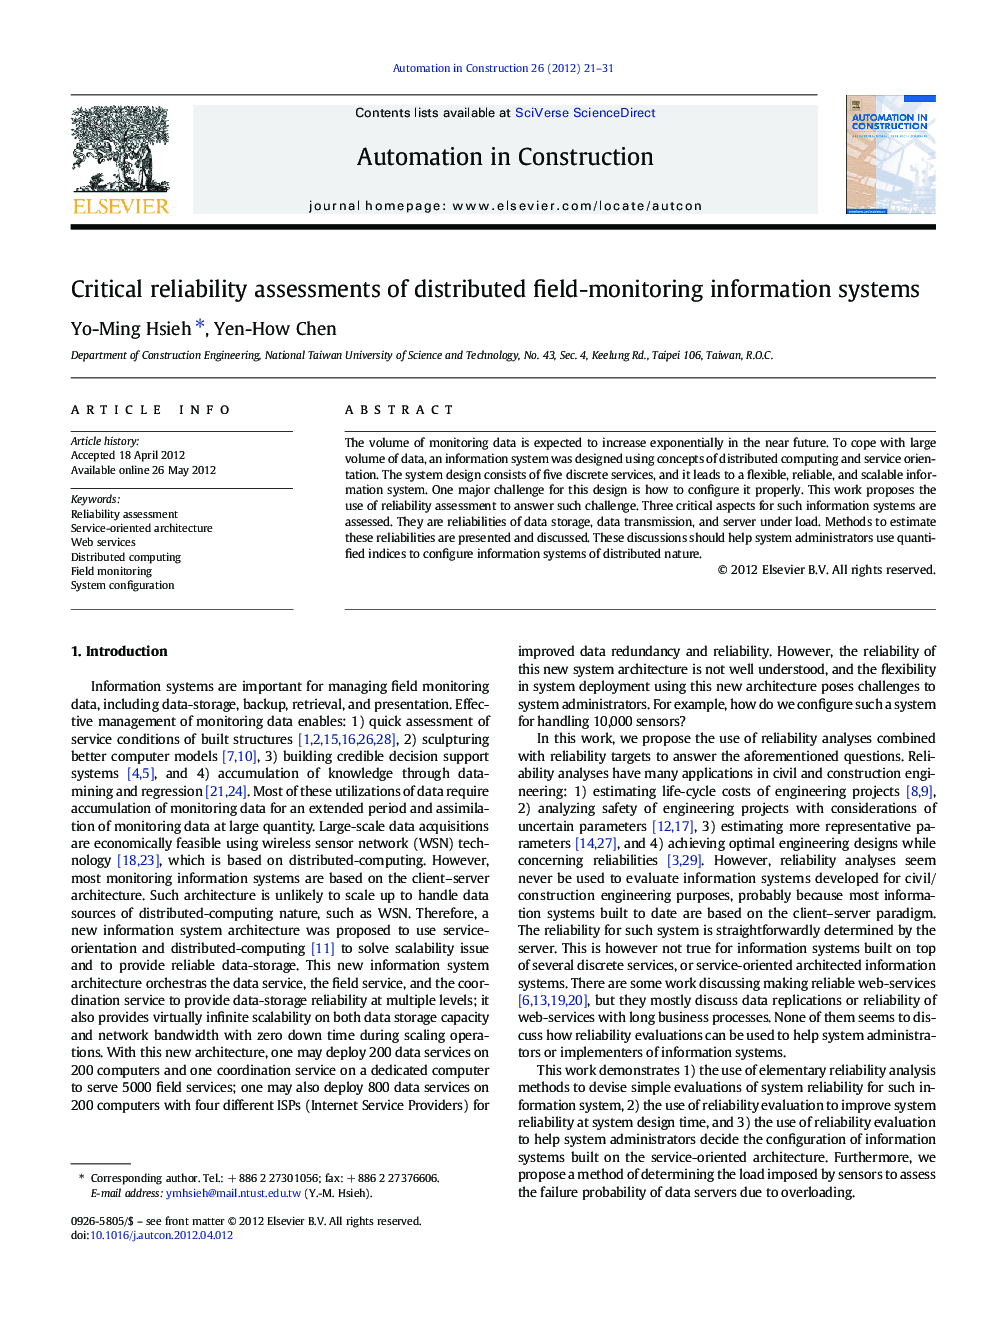 Critical reliability assessments of distributed field-monitoring information systems